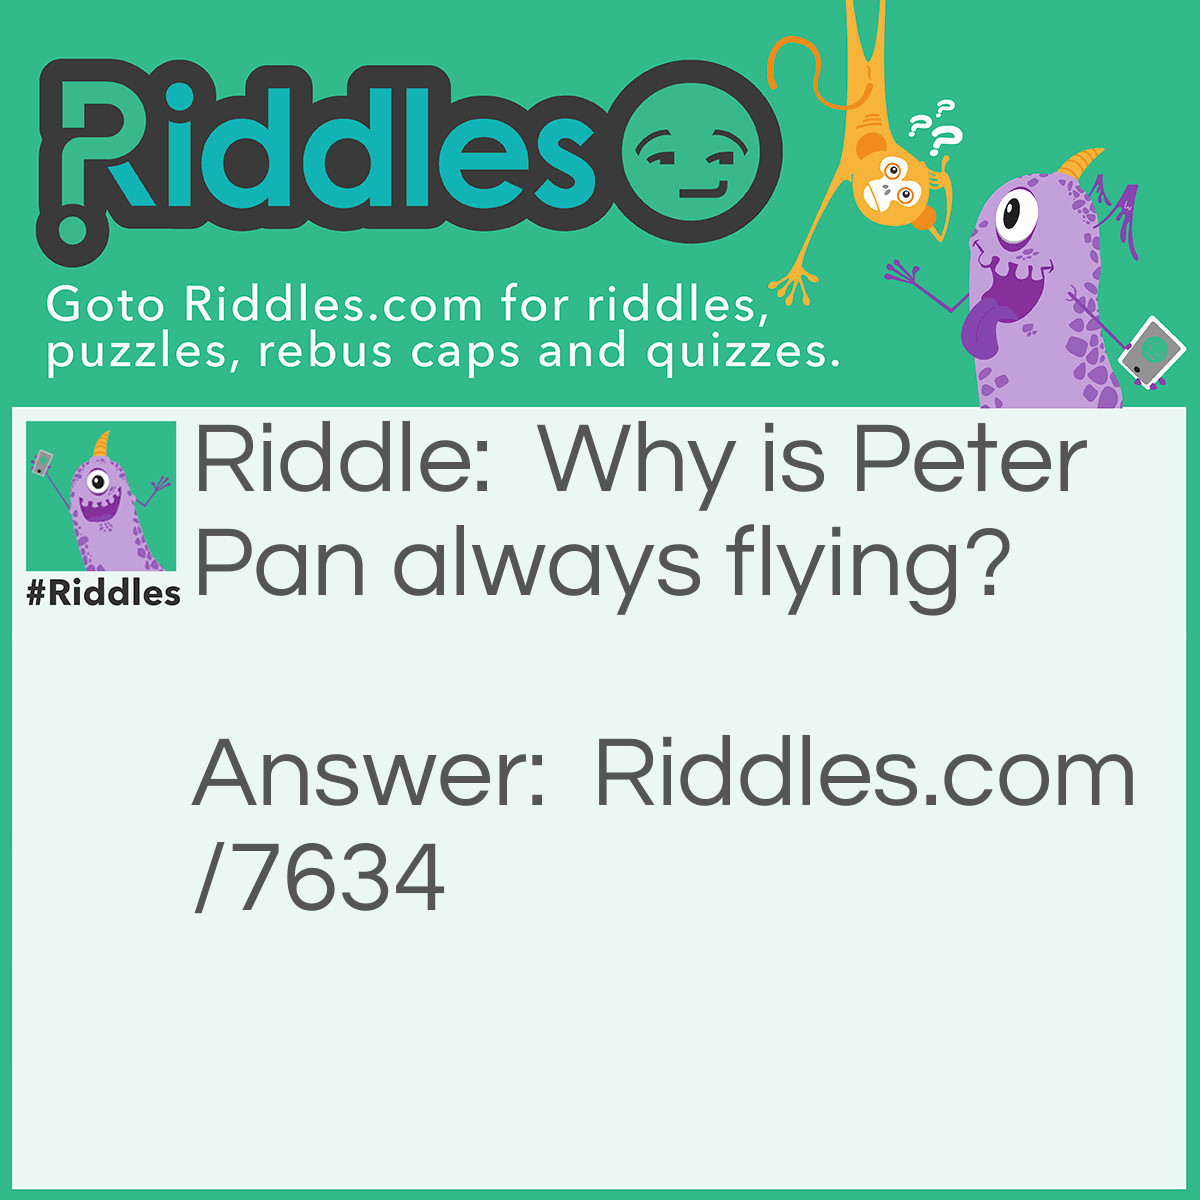 Riddle: Why is Peter Pan always flying? Answer: He Neverlands.